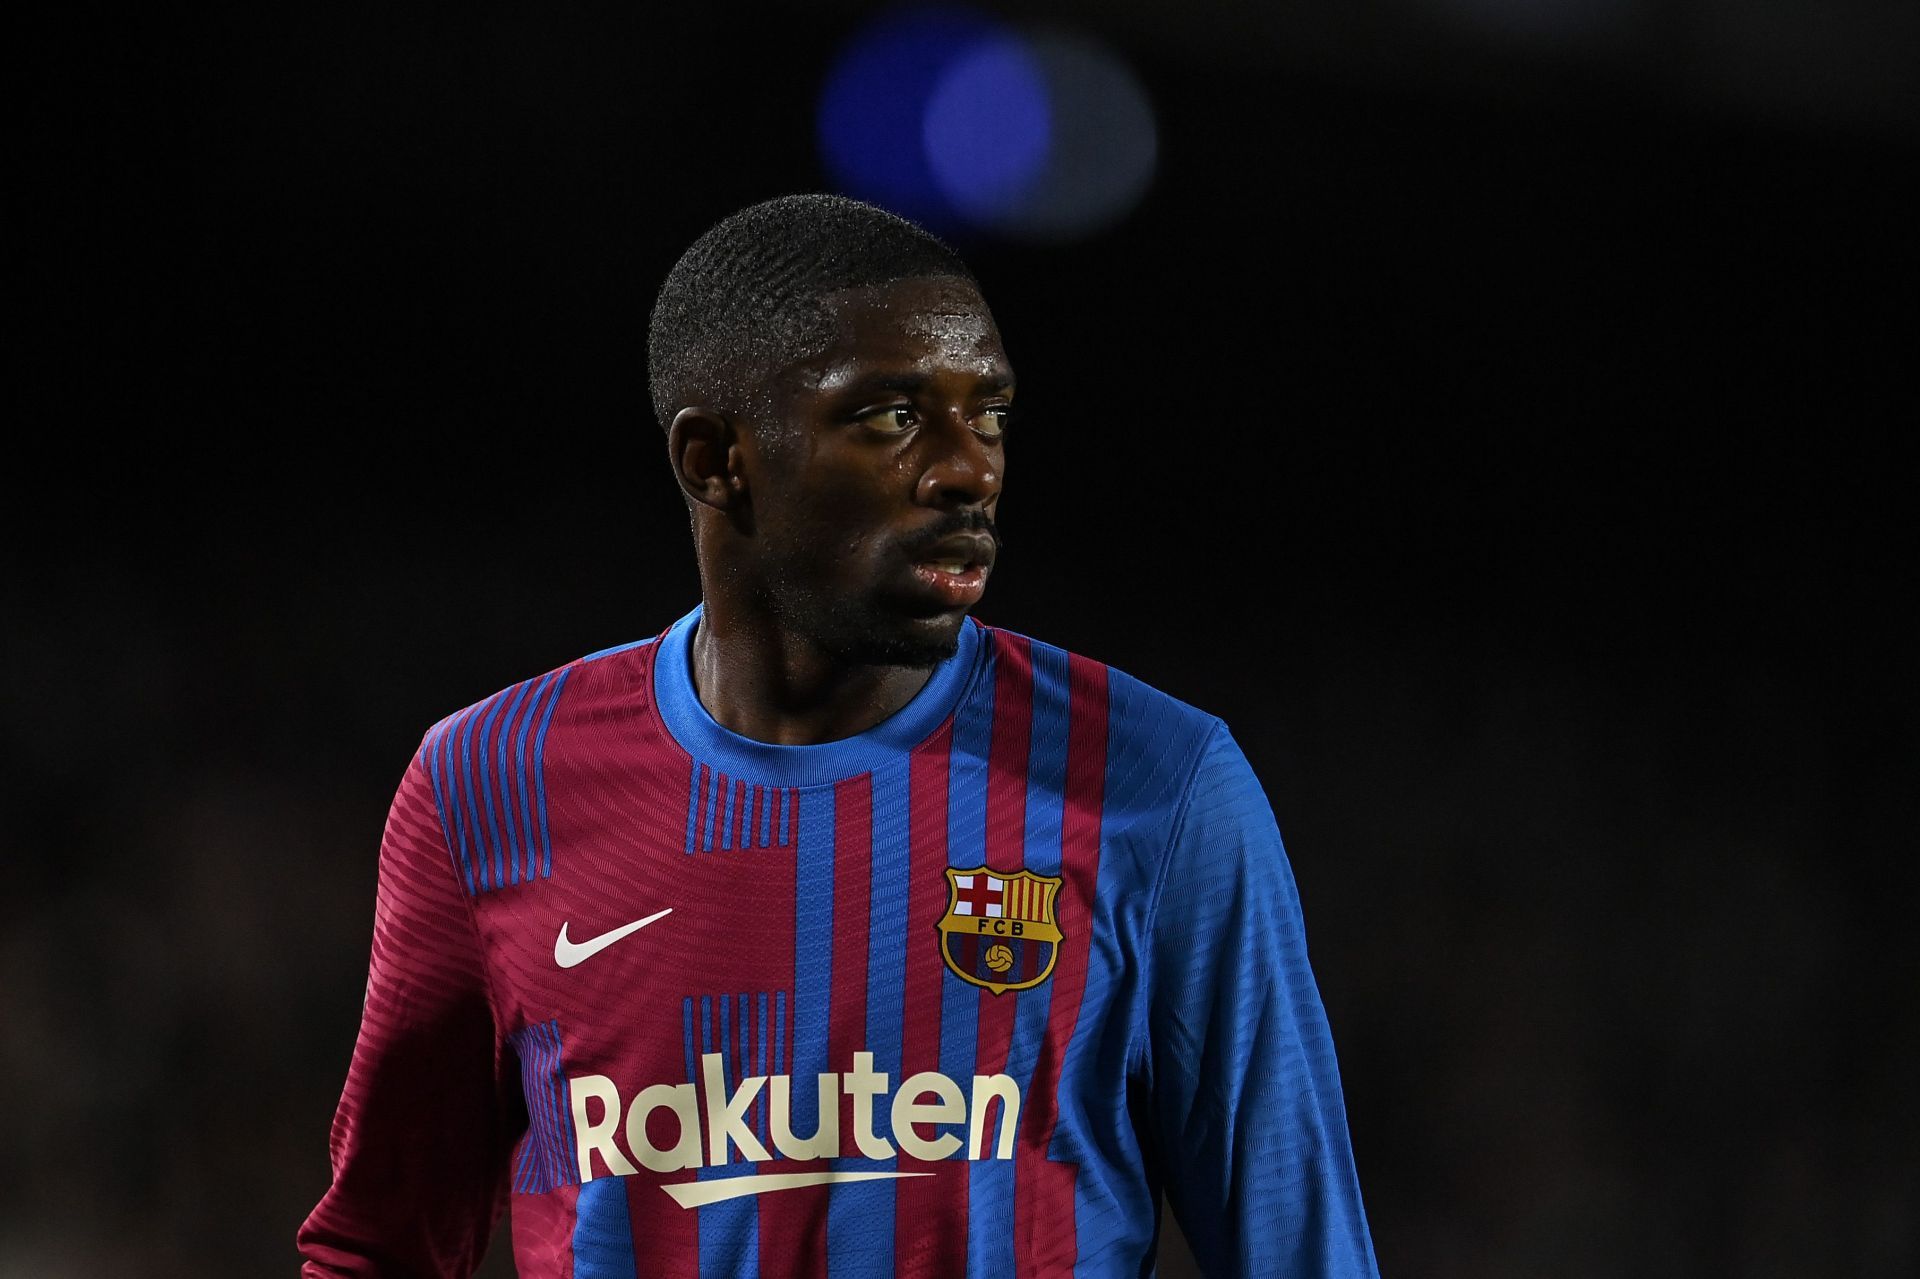 Ousmane Dembele has looked brilliant on occasion this season.